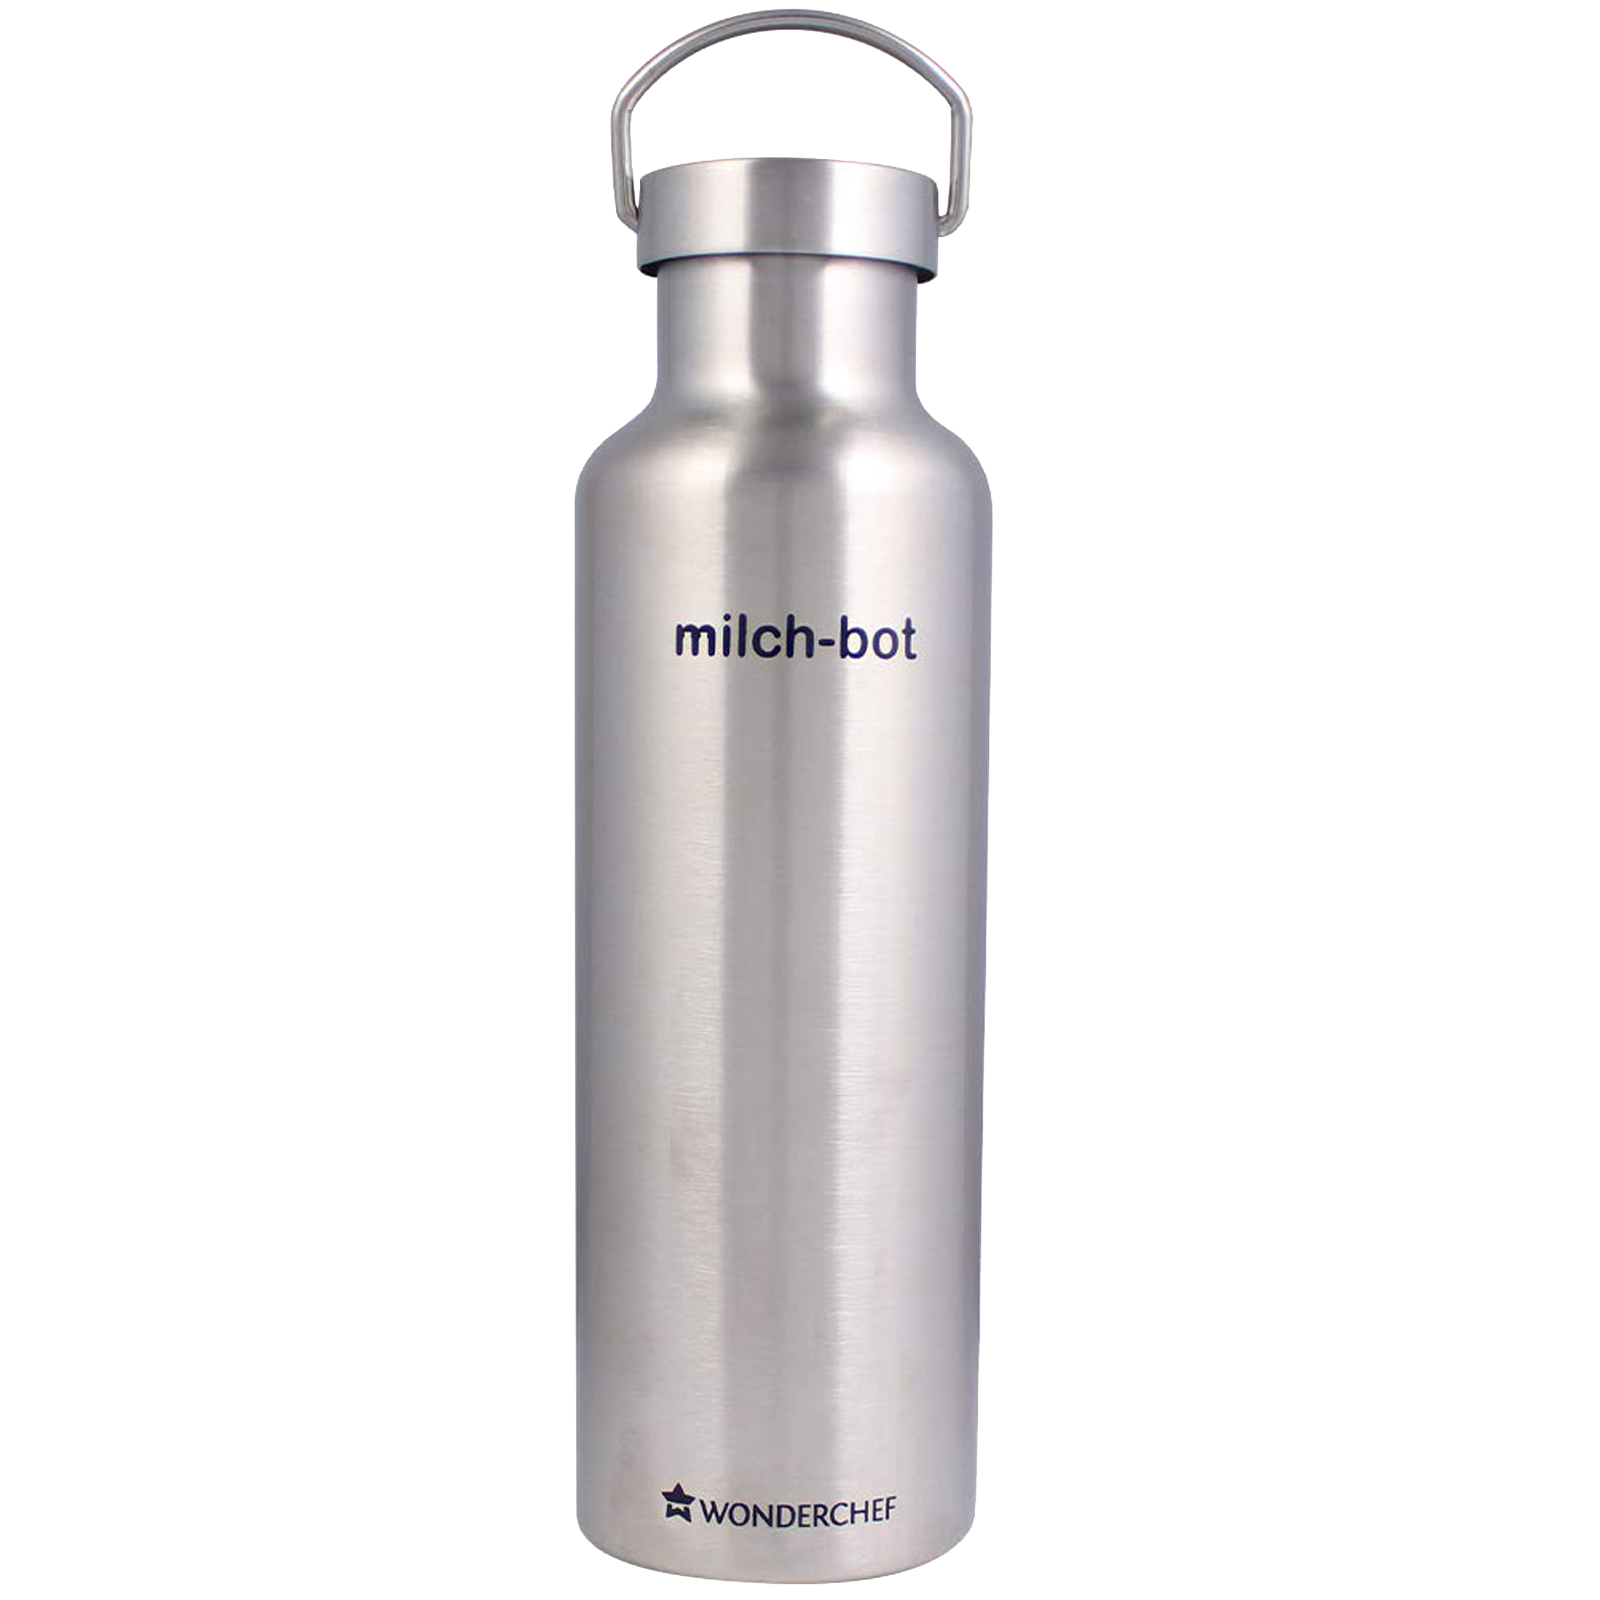 Wonderchef Milch-Bot 0.75 Litres Stainless Steel Water Bottle (Vacuum Insulated, 63153234, Silver)_1